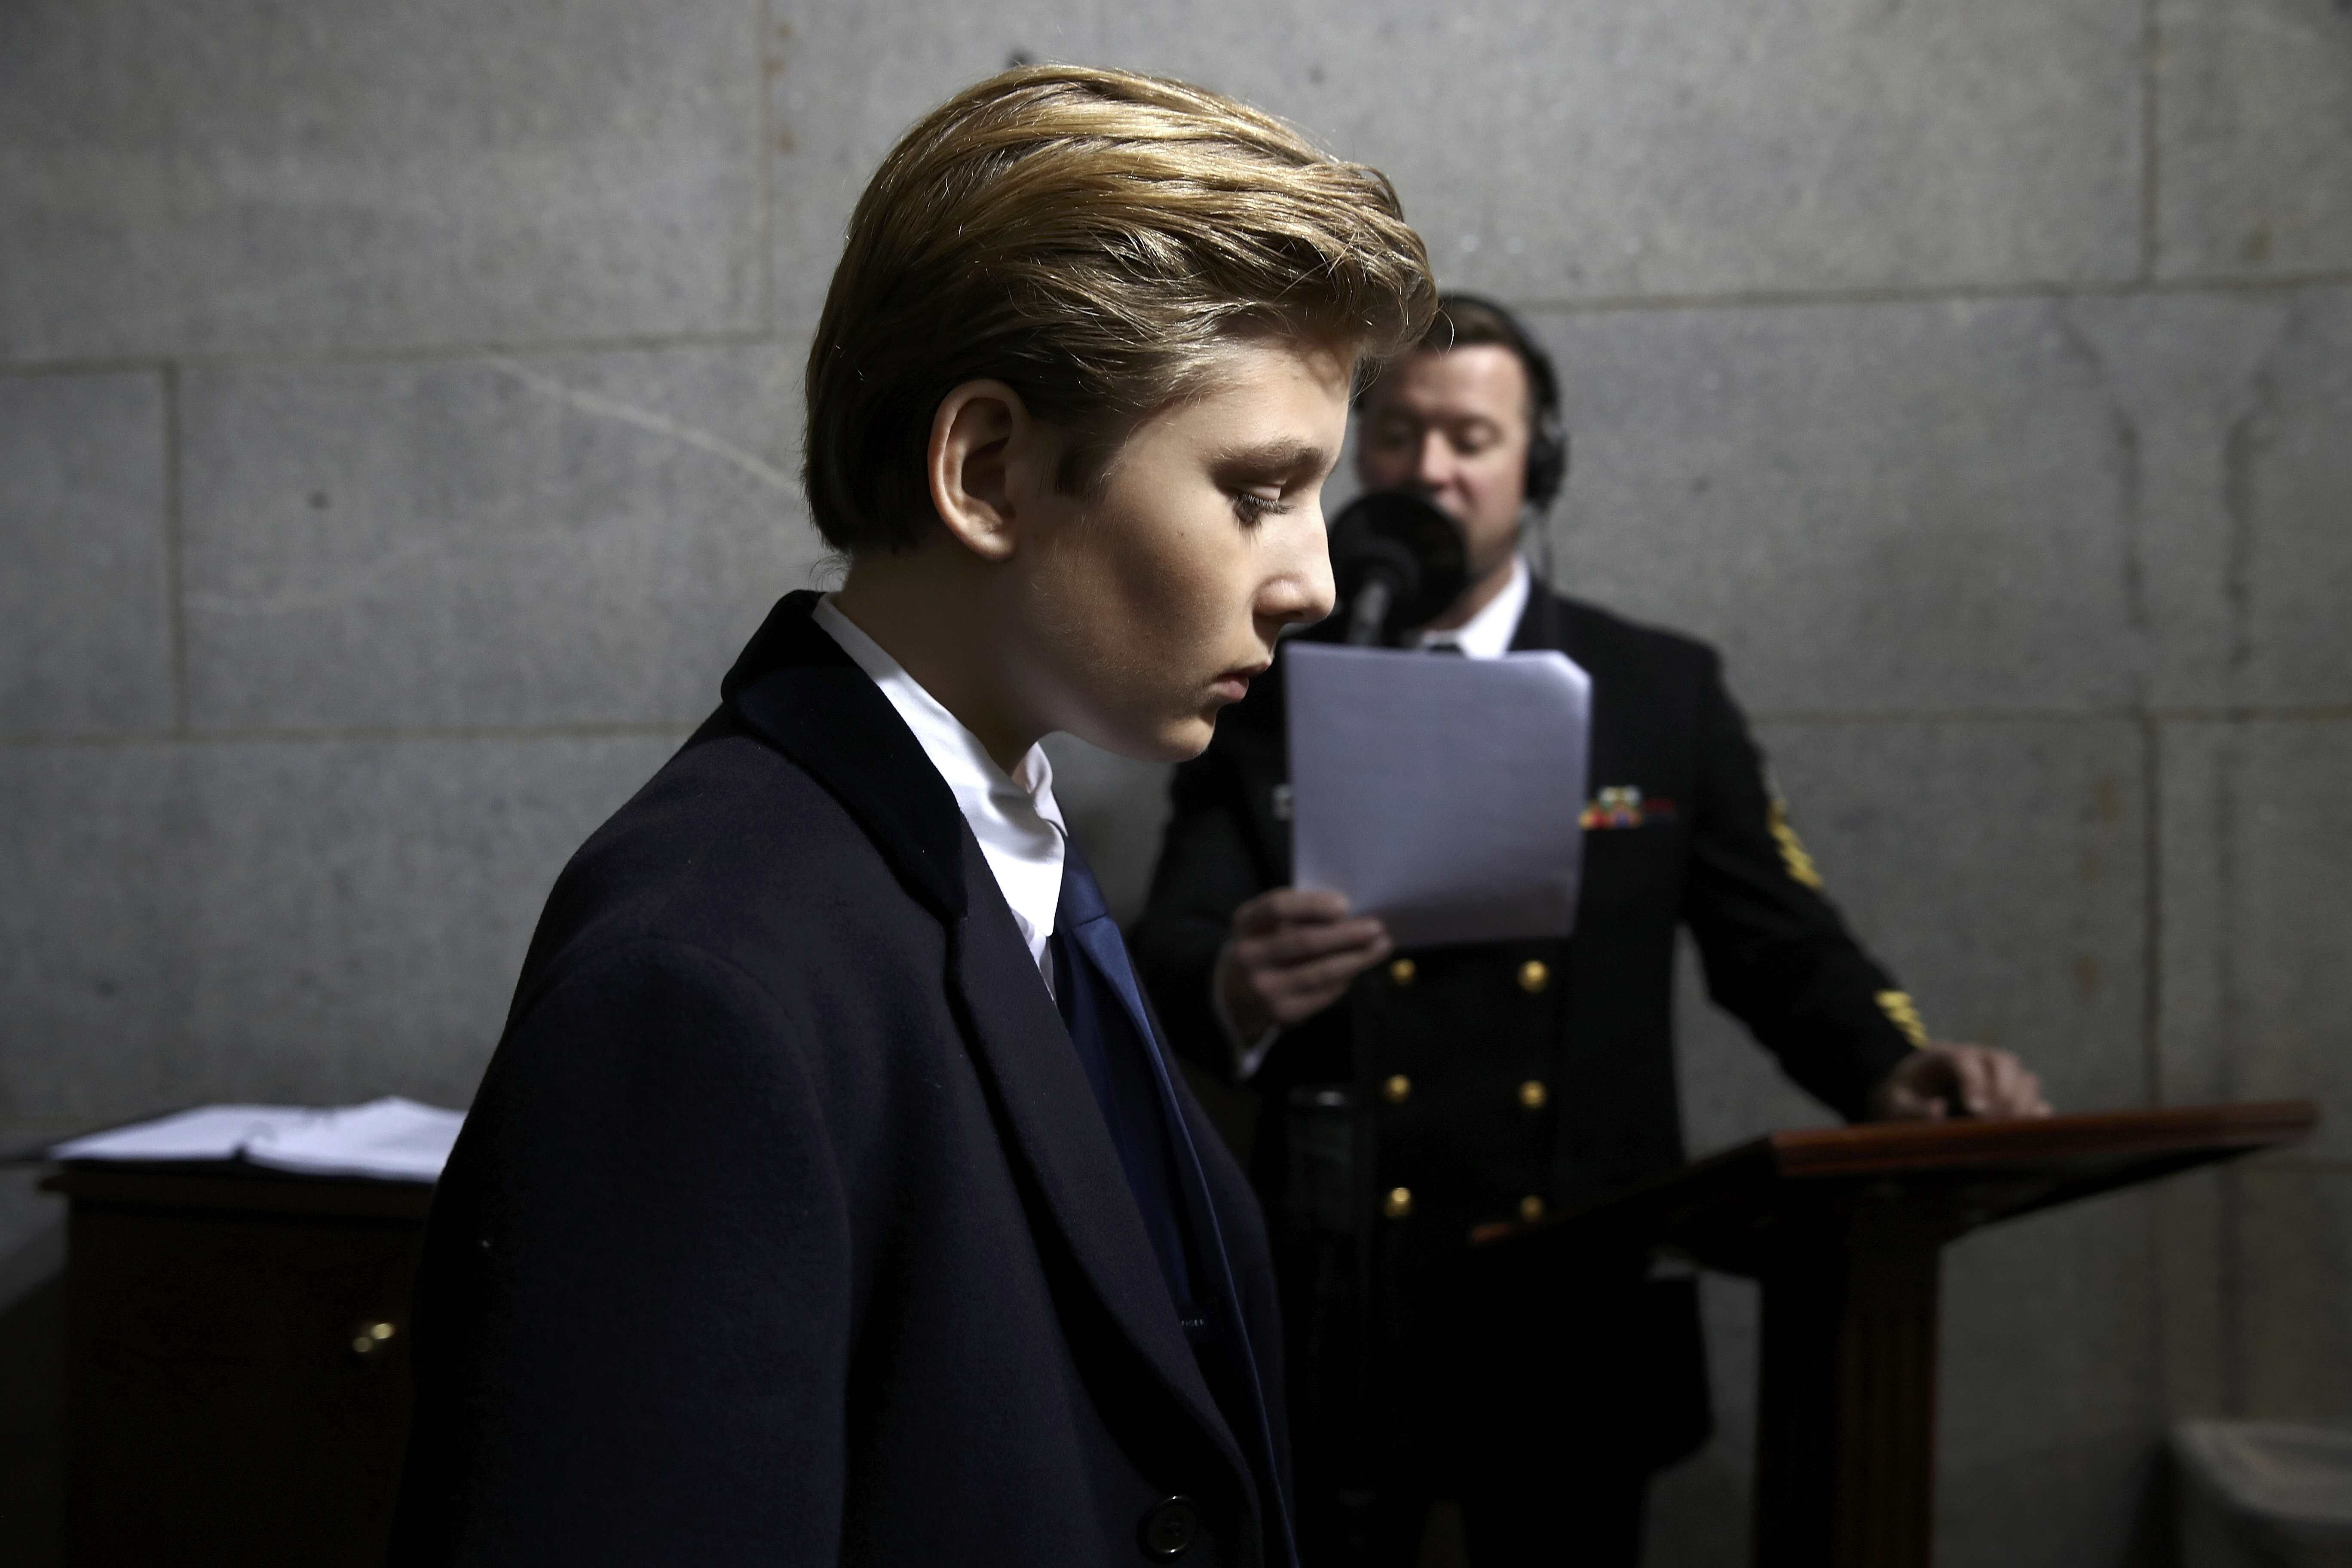 Barron, son of US President Donald Trump, has attracted criticism but has had his defenders too, not least his mum, first lady Melania Trump. Photo: Reuters